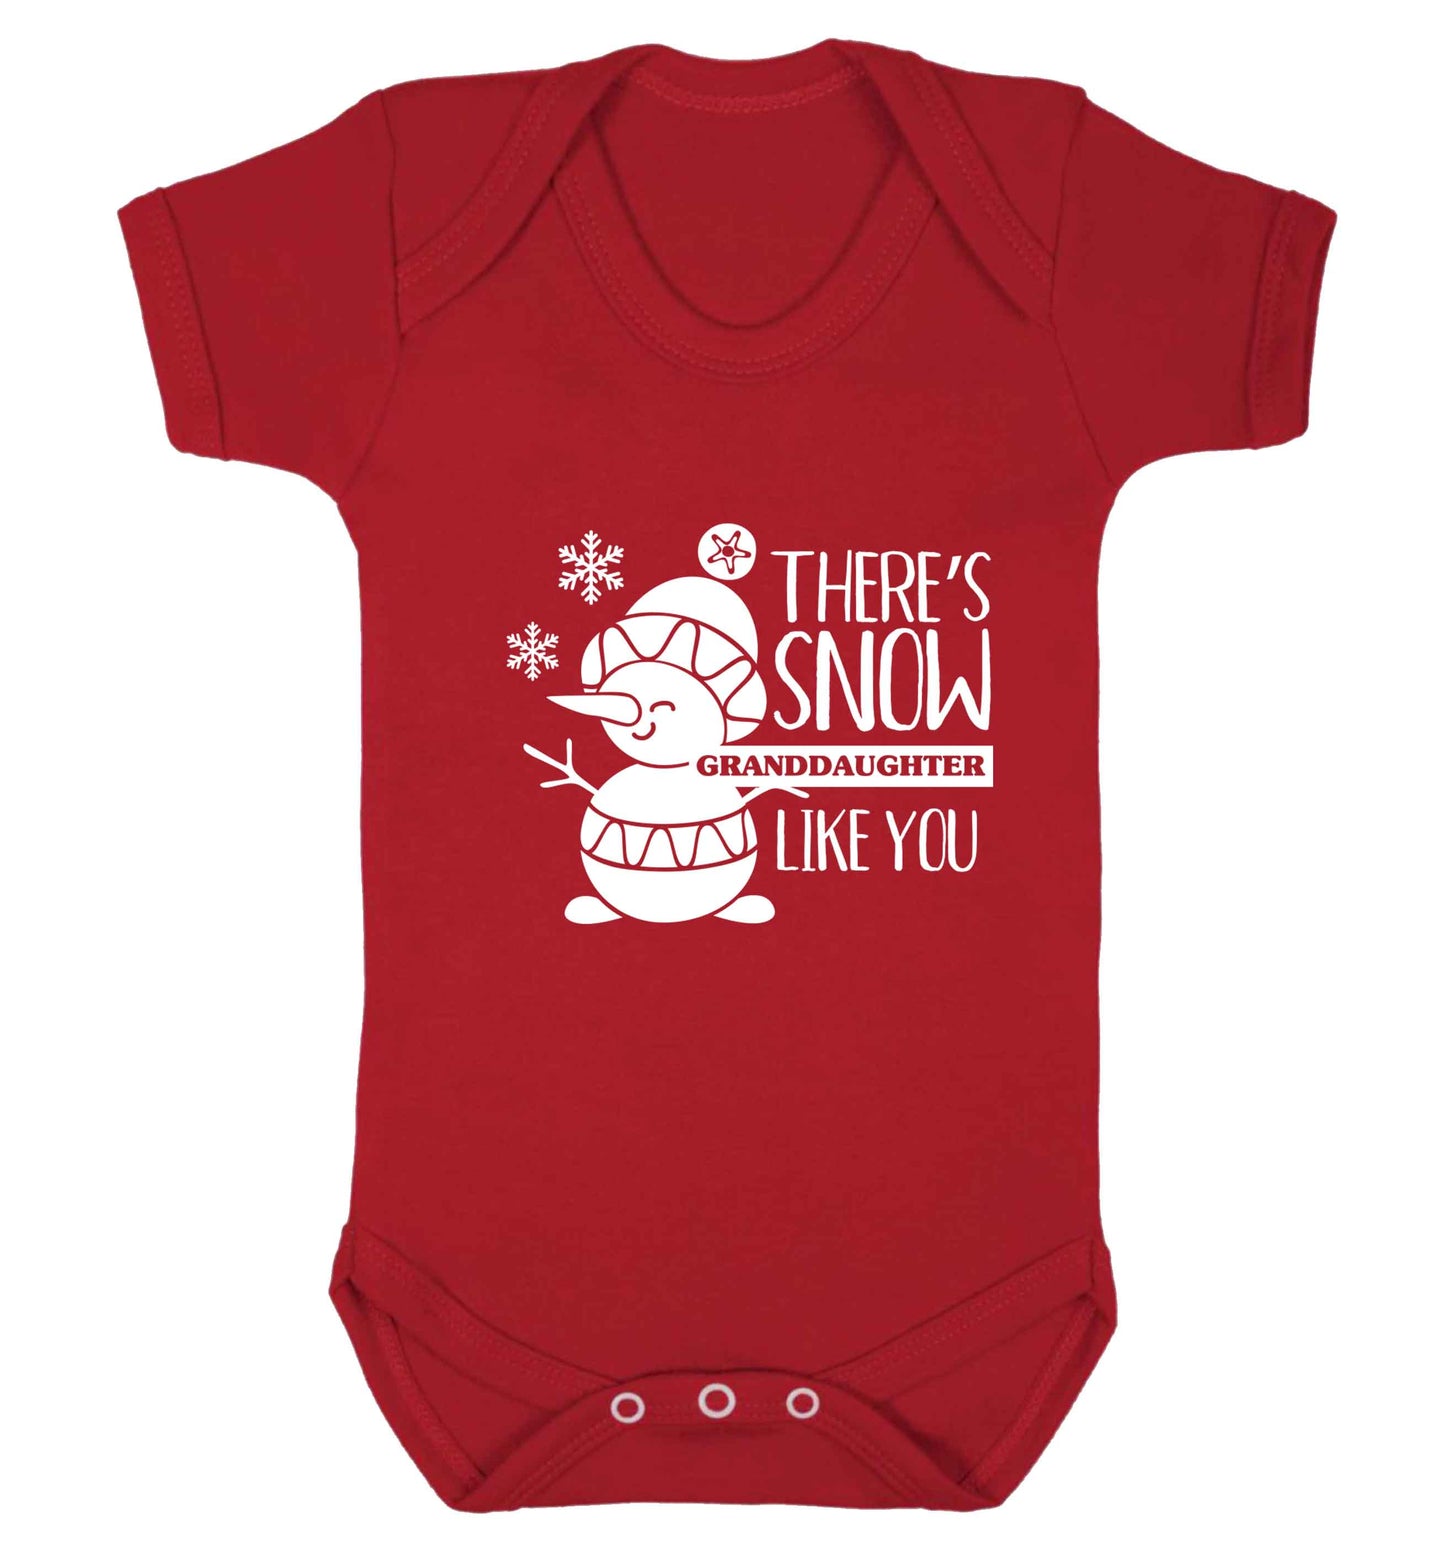 There's snow granddaughter like you baby vest red 18-24 months